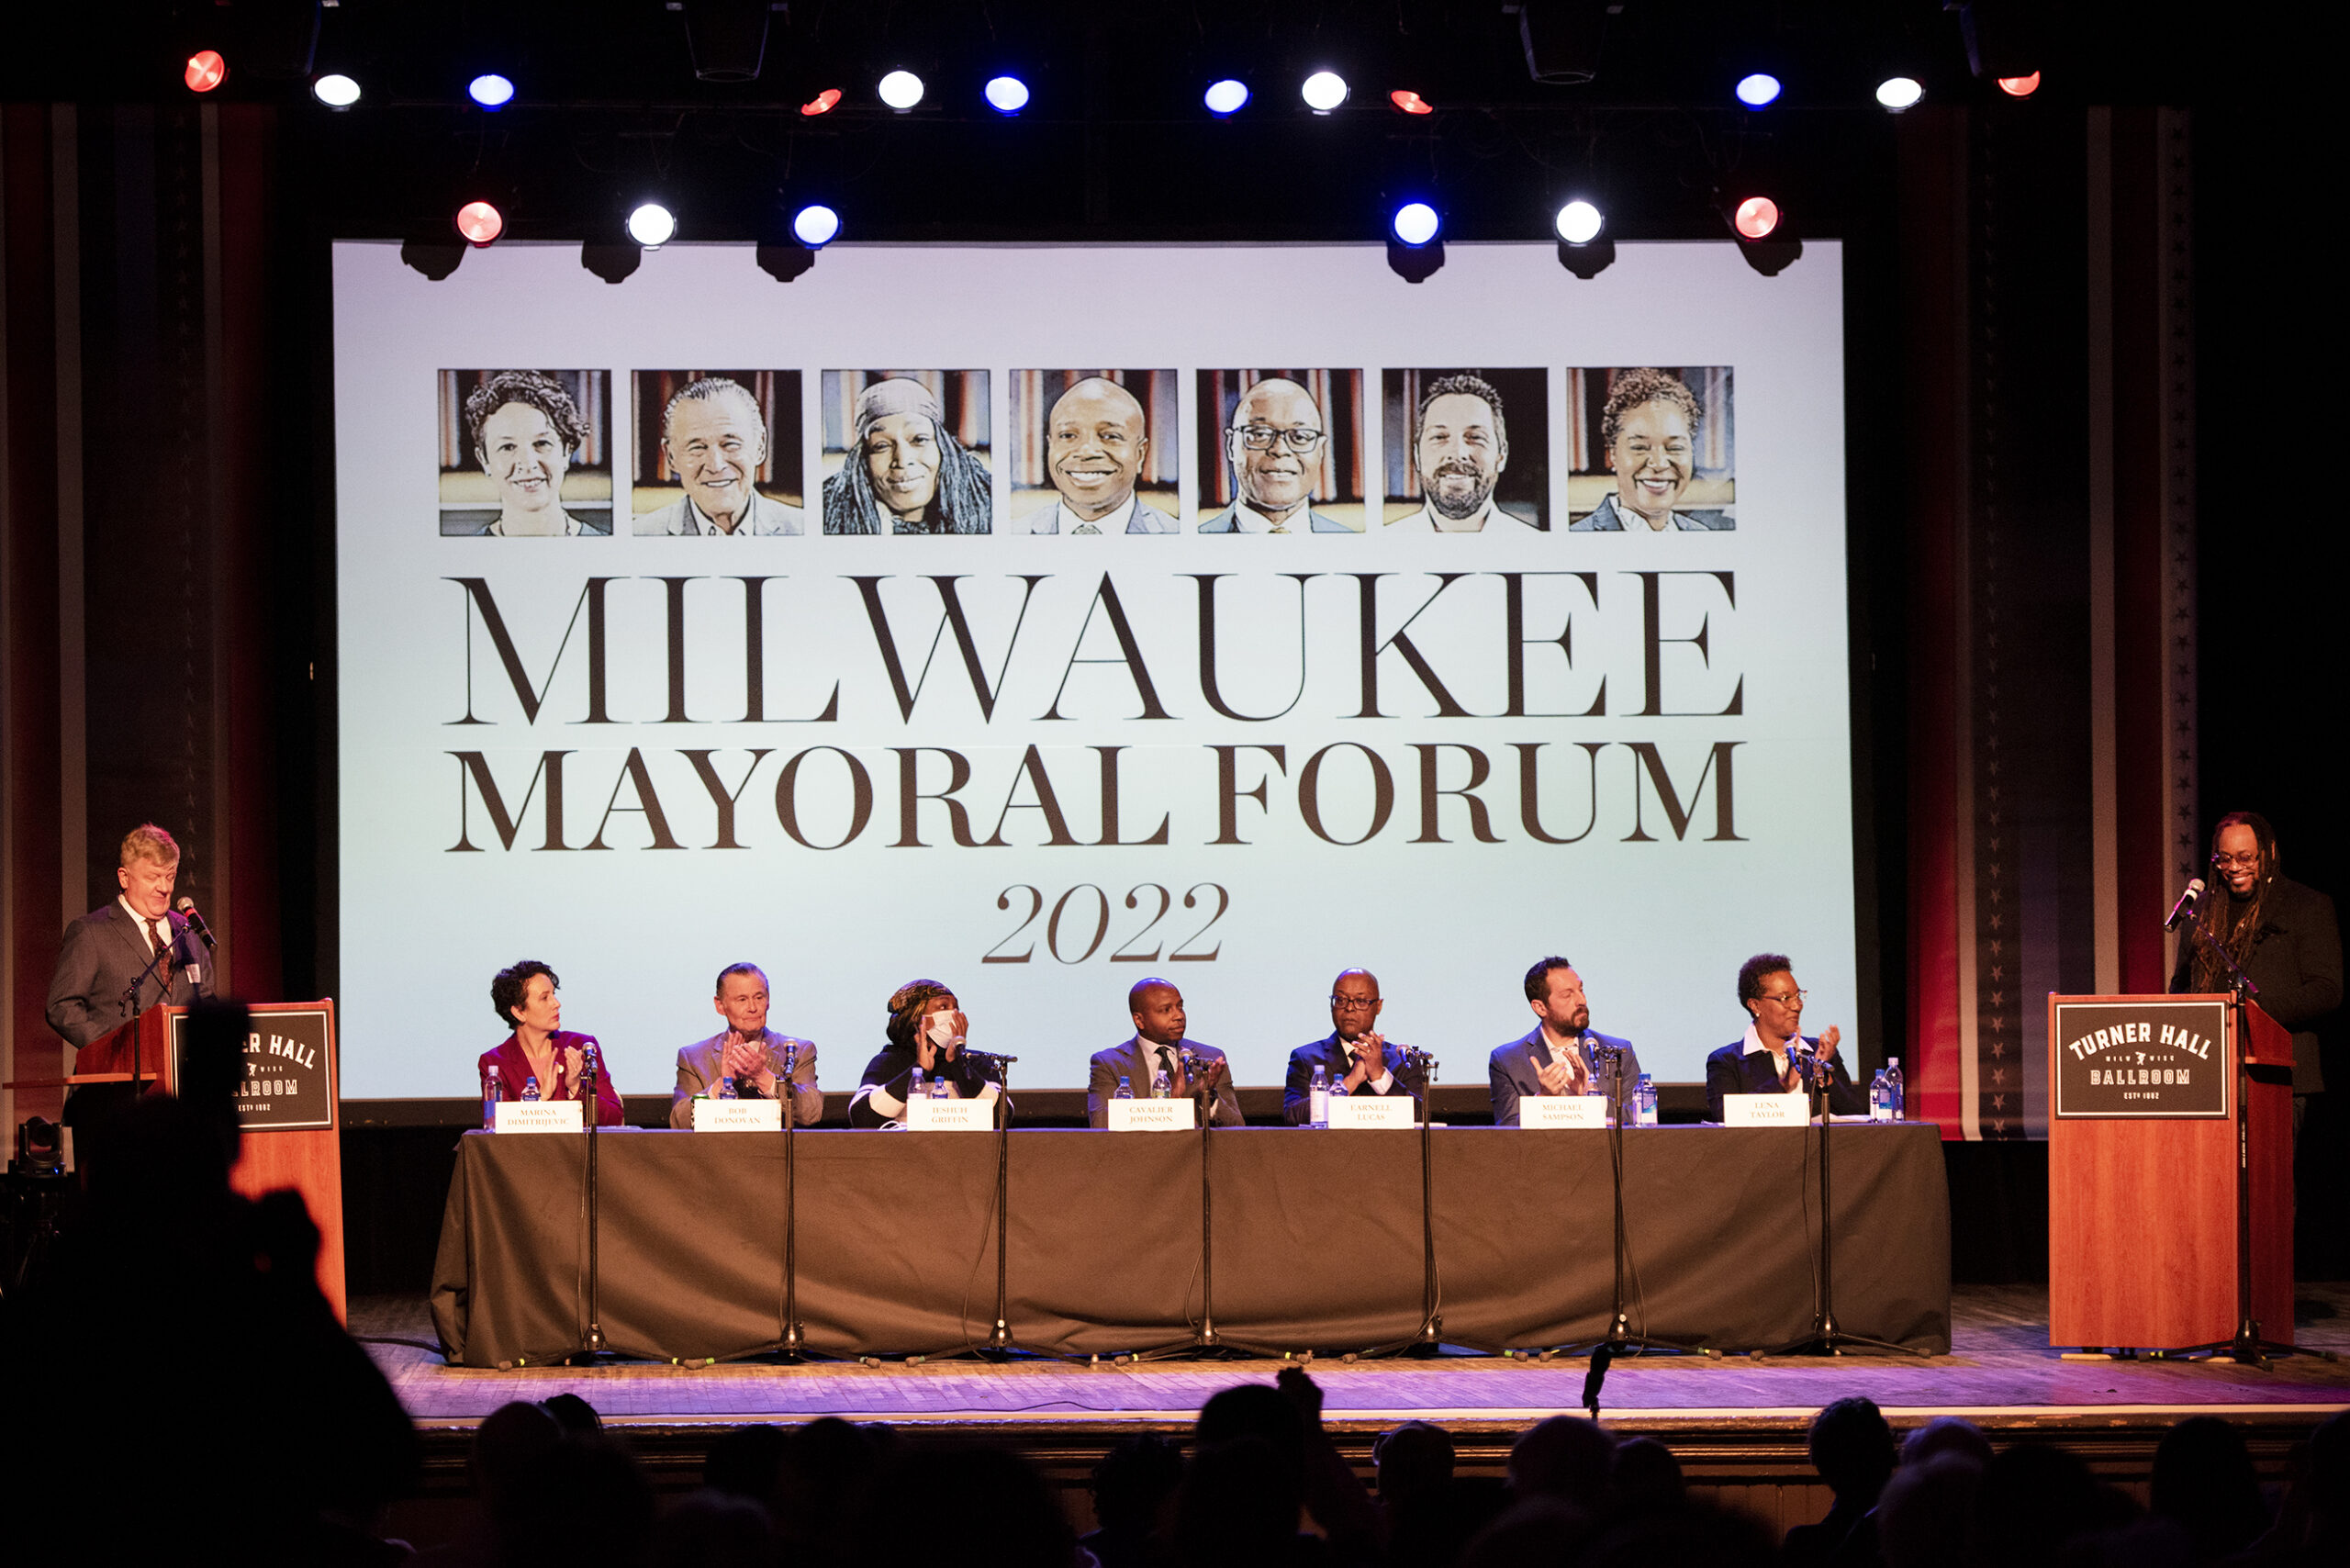 Reckless driving, housing among issues debated at Milwaukee mayoral forum